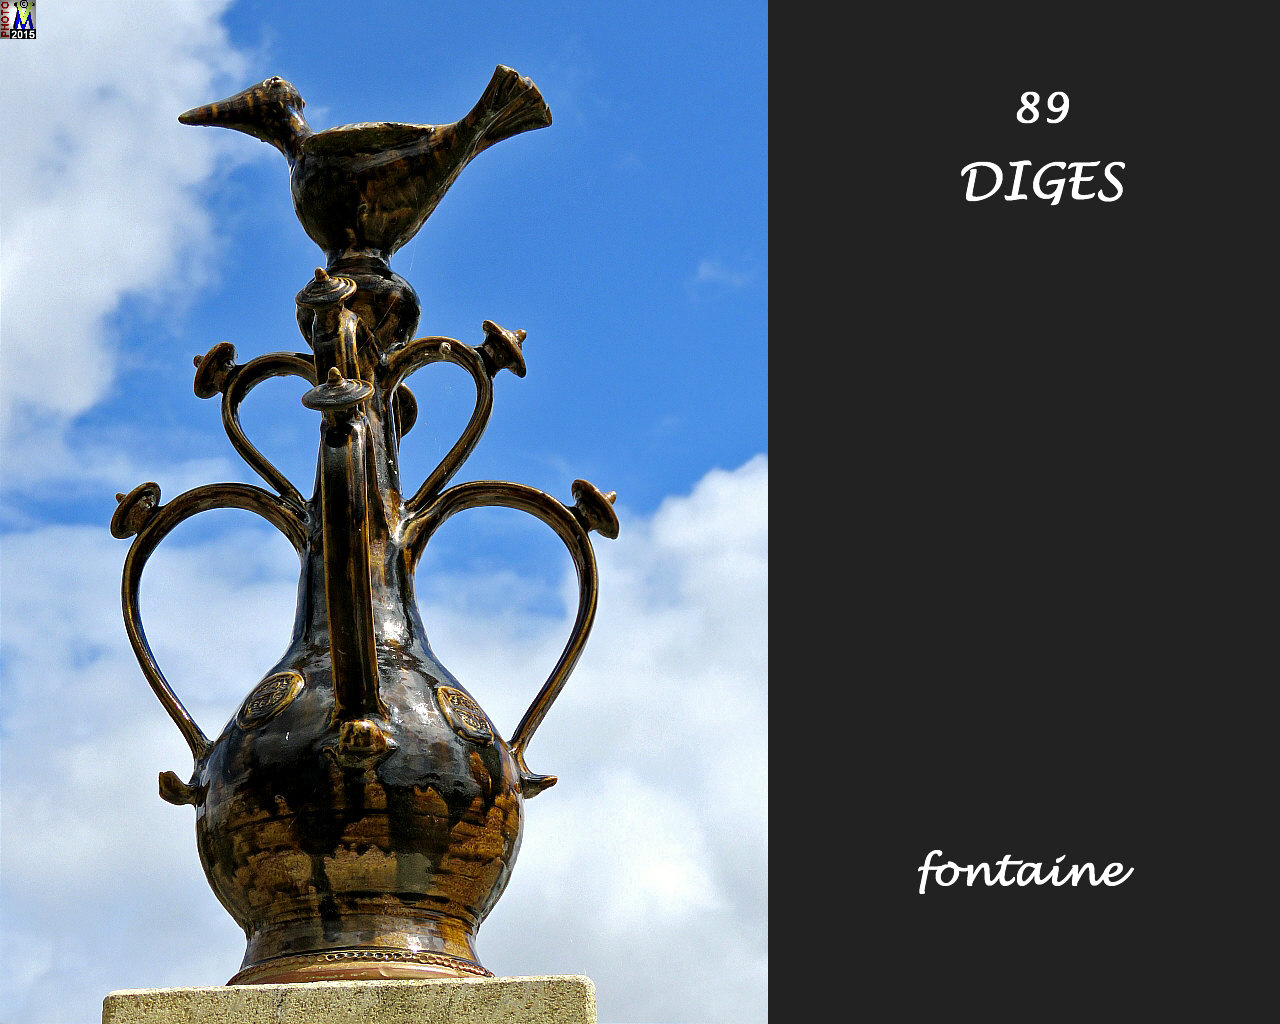 89DIGES_fontaine_102.jpg